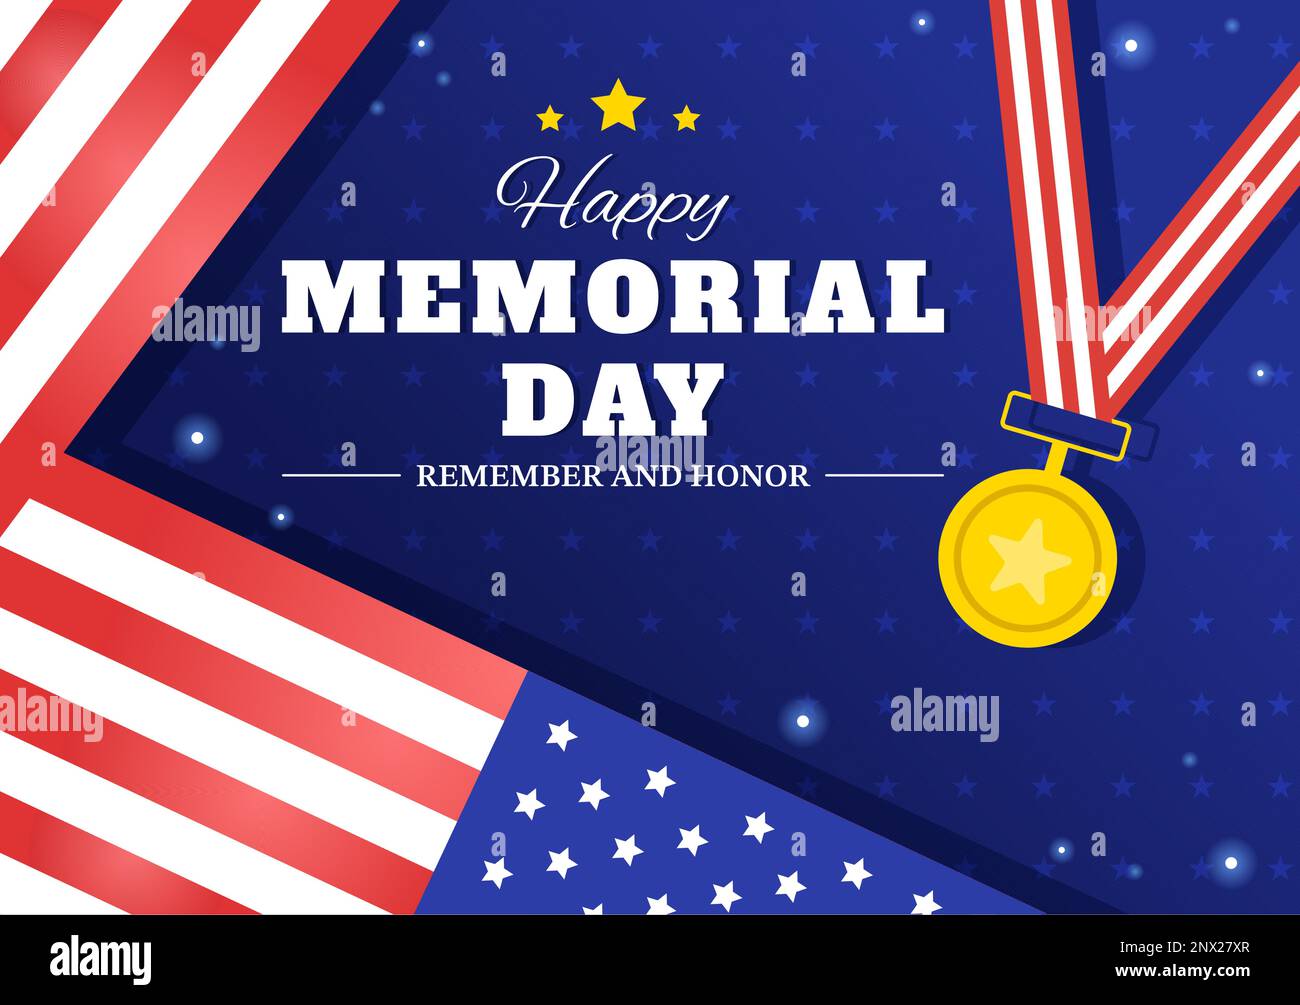 Memorial Day Illustration mit American Flag, Remember and Honor to Meritorious Soldier in Flat Cartoon Hand Drawn for Landing Page Templates Stock Vektor